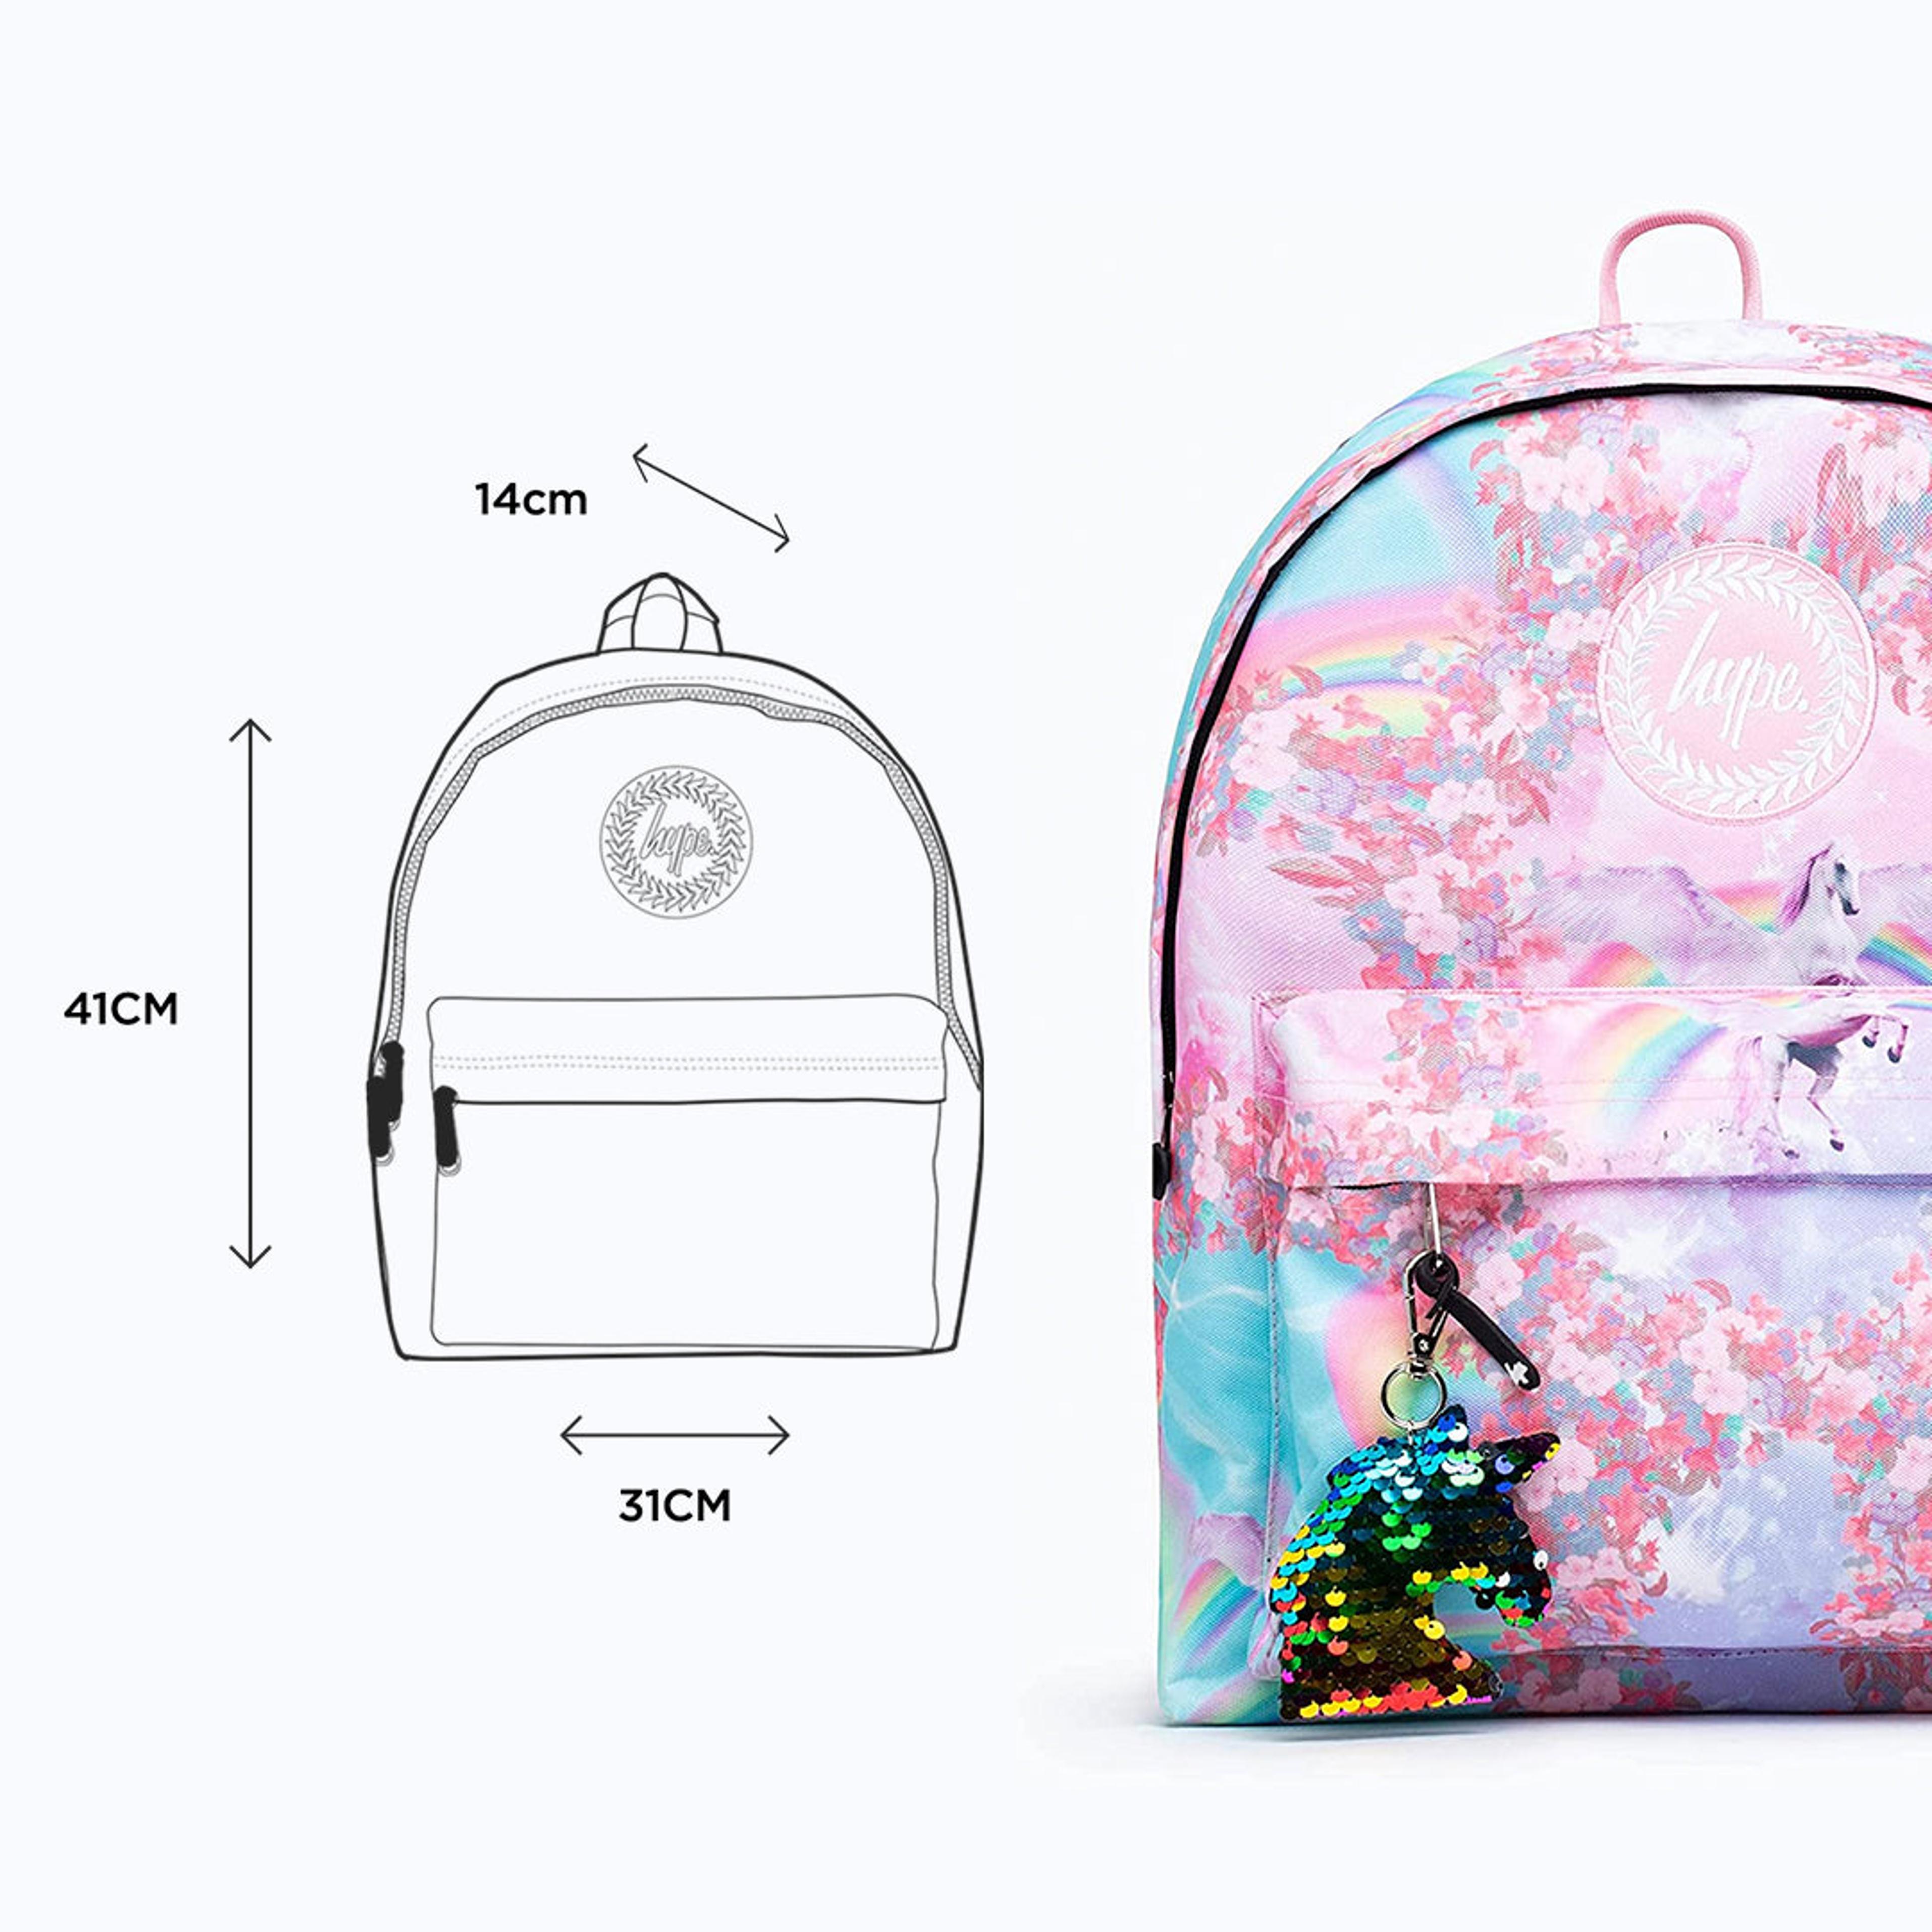 Alternate View 1 of HYPE UNISEX HOLOGRAPHIC RAINBOW CREST BACKPACK